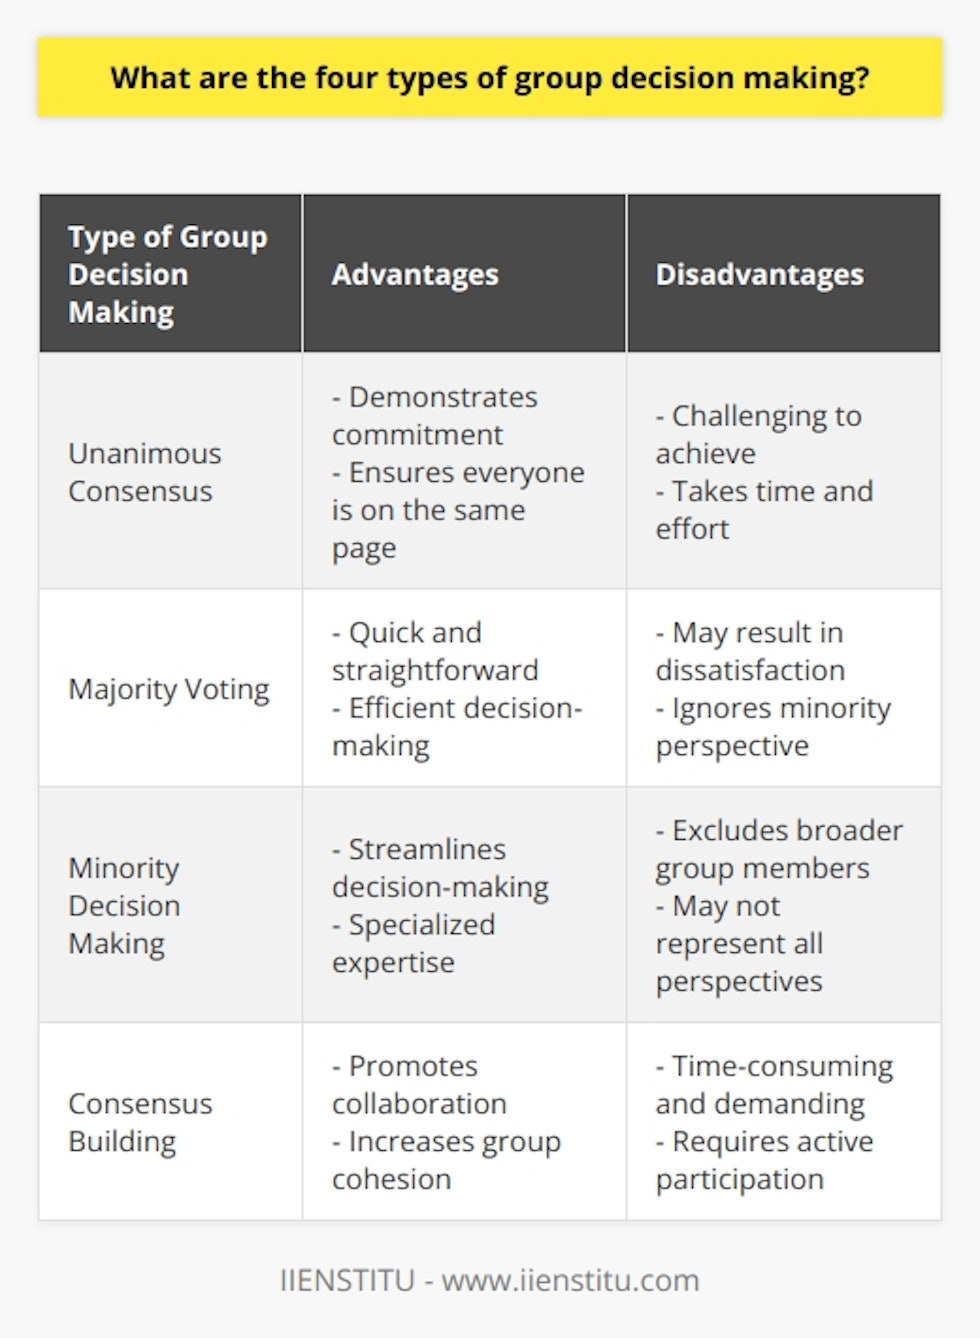 Group decision making plays a crucial role in organizations and various other settings. It involves multiple individuals coming together to make a collective decision that affects the group as a whole. There are four main types of group decision making: unanimous consensus, majority voting, minority decision making, and consensus building.Unanimous consensus is the ideal type of group decision making, where all participants reach a complete agreement on the proposed decision. It demonstrates a high level of commitment from all group members and ensures that everyone is on the same page. However, achieving unanimous consensus can be challenging, especially in large groups with diverse perspectives and interests. It may take a considerable amount of time and effort to reach a unanimous decision.Majority voting is a commonly used approach in formal decision-making processes. Each participant casts their vote for one of the proposed options, and the option with the majority of votes is considered the group's decision. This method is relatively quick and straightforward, but it may result in dissatisfaction among those who did not support the chosen option. It is important to note that this approach may not take into account the minority's perspective, potentially leading to a lack of acceptance and unity within the group.Minority decision making occurs when a small subgroup within a larger group makes decisions on behalf of the entire group. This approach is often seen in specialized committees or designated teams with specific expertise or authority in a particular topic. The larger group delegates decision-making authority to these minority groups to streamline the process. However, this approach can exclude or marginalize the voices and opinions of the broader group members. It is essential to ensure that the minority group adequately represents the interests and perspectives of the entire group.Consensus building involves open dialogue, active listening, and collaboration among group members to reach a decision that is acceptable to all. This method promotes a sense of shared ownership and responsibility, leading to increased group cohesion and harmony. Consensus building may be time-consuming and demanding, as it requires active participation and a willingness to consider different viewpoints. However, the decisions reached through consensus building tend to be more informed and have broader support from all group members.In conclusion, each of the four types of group decision making has its advantages and disadvantages. Unanimous consensus reflects complete agreement and commitment, majority voting is relatively fast and straightforward, minority decision making can streamline the process but may exclude certain voices, and consensus building promotes collaboration and greater group cohesion. Choosing the most appropriate approach depends on the specific context and objectives of the group. Effective group decision making is essential for achieving the group's goals efficiently and maintaining unity within the group.